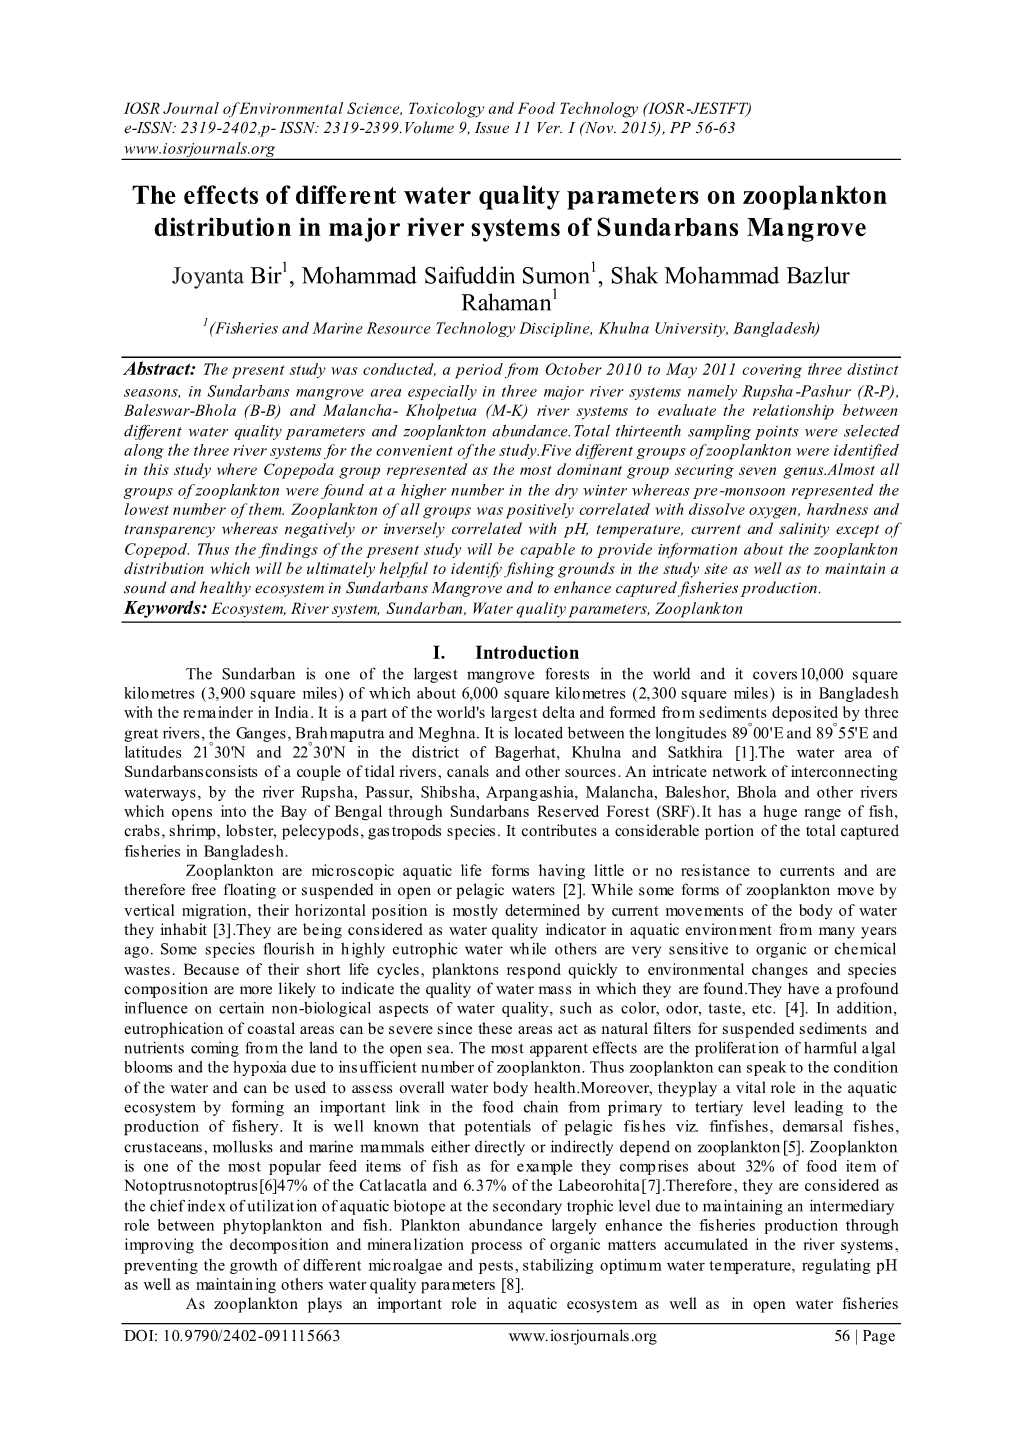 The Effects of Different Water Quality Parameters on Zooplankton Distribution in Major River Systems of Sundarbans Mangrove